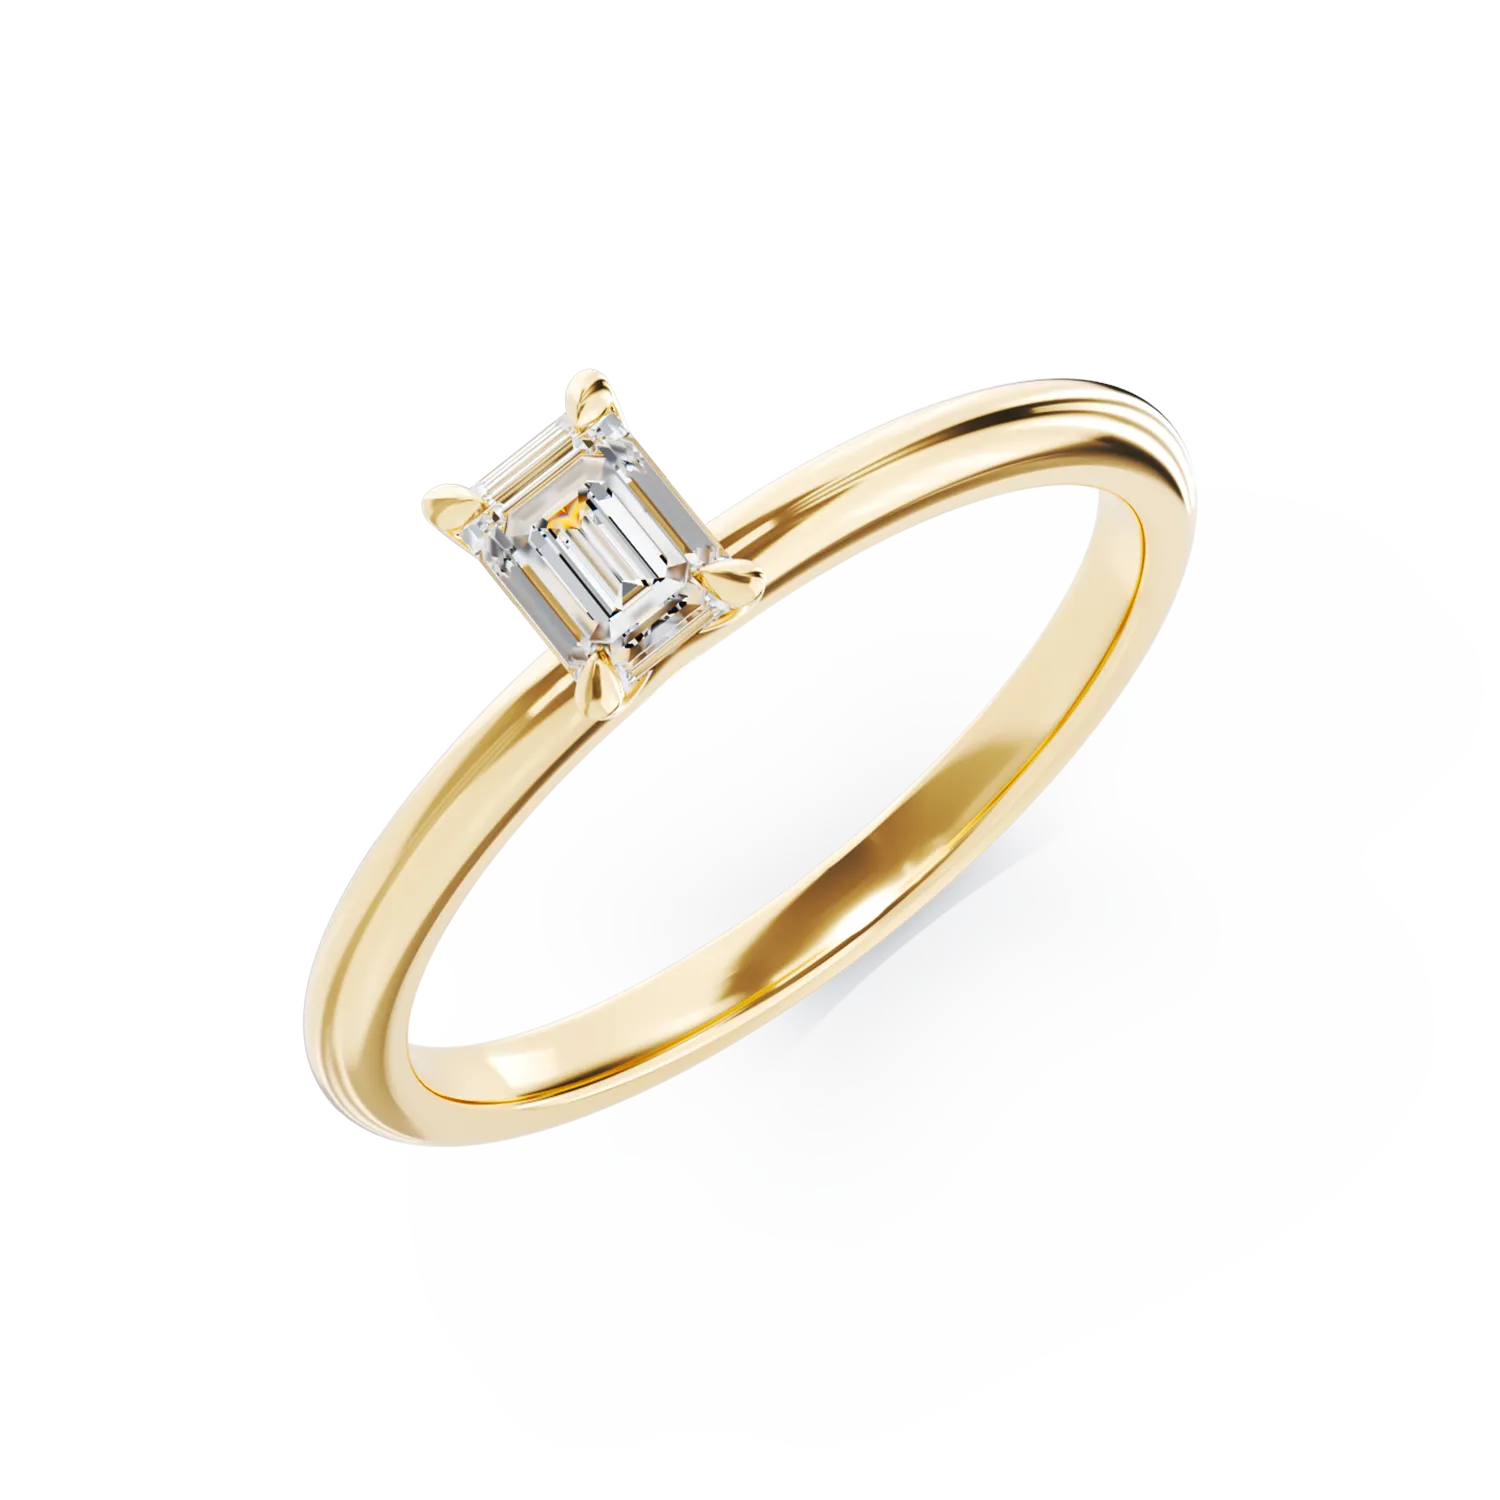 18K yellow gold engagement ring with a 0.4ct solitaire diamond